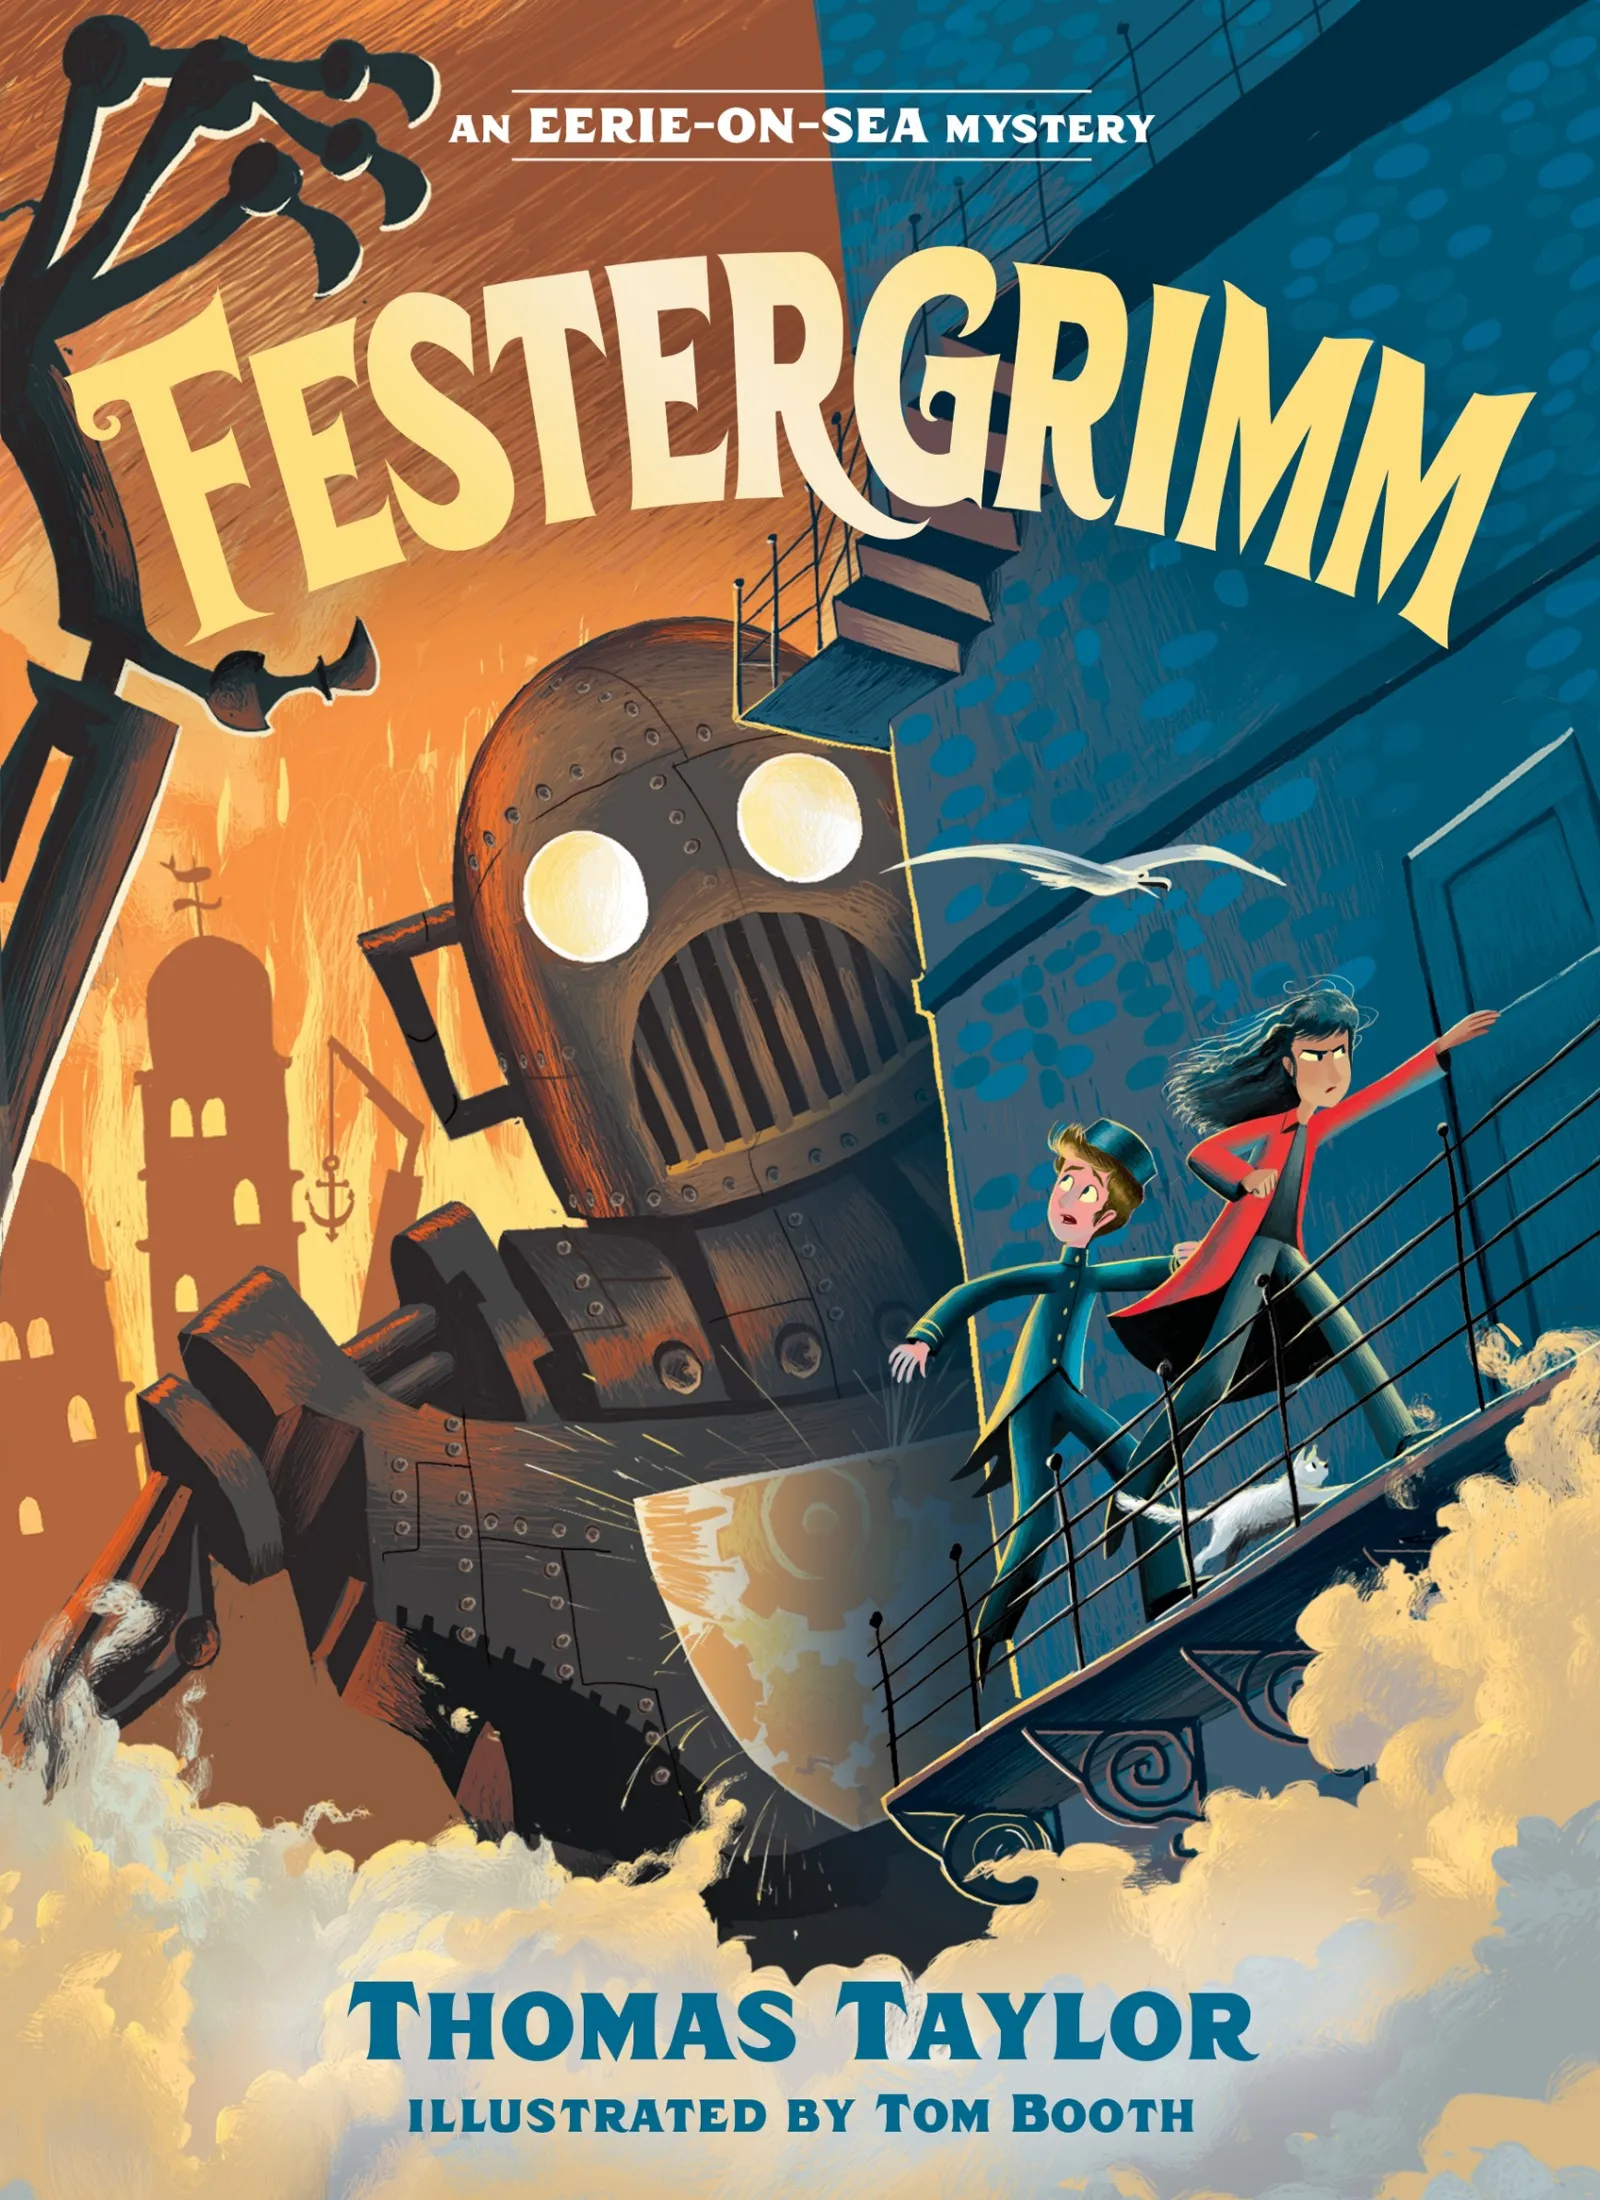 Festergrimm (The Legends of Eerie-on-Sea #4)